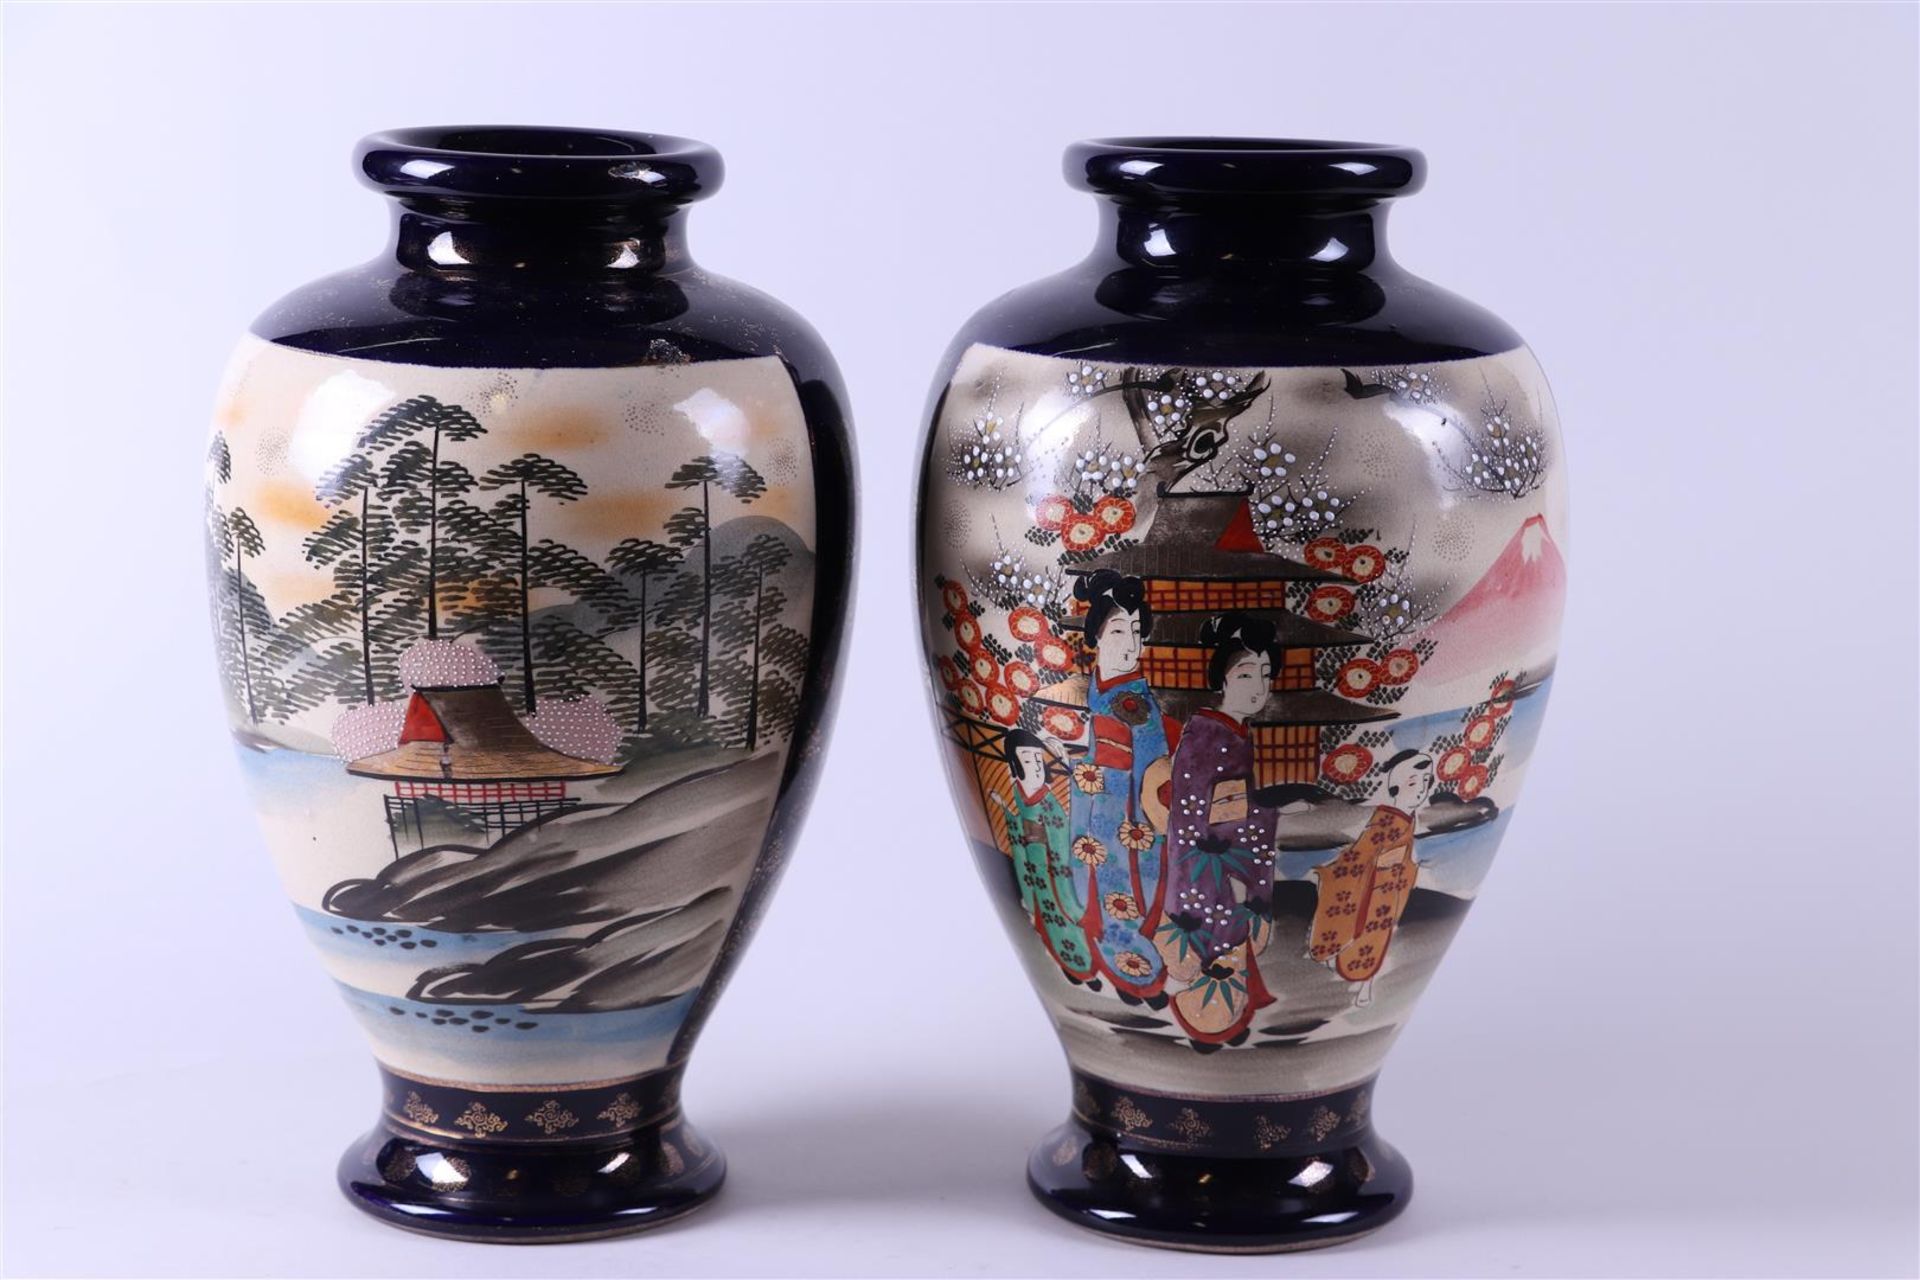 A set of two Satsuma pottery vases decorated with various figures. Japan, early 20th century.